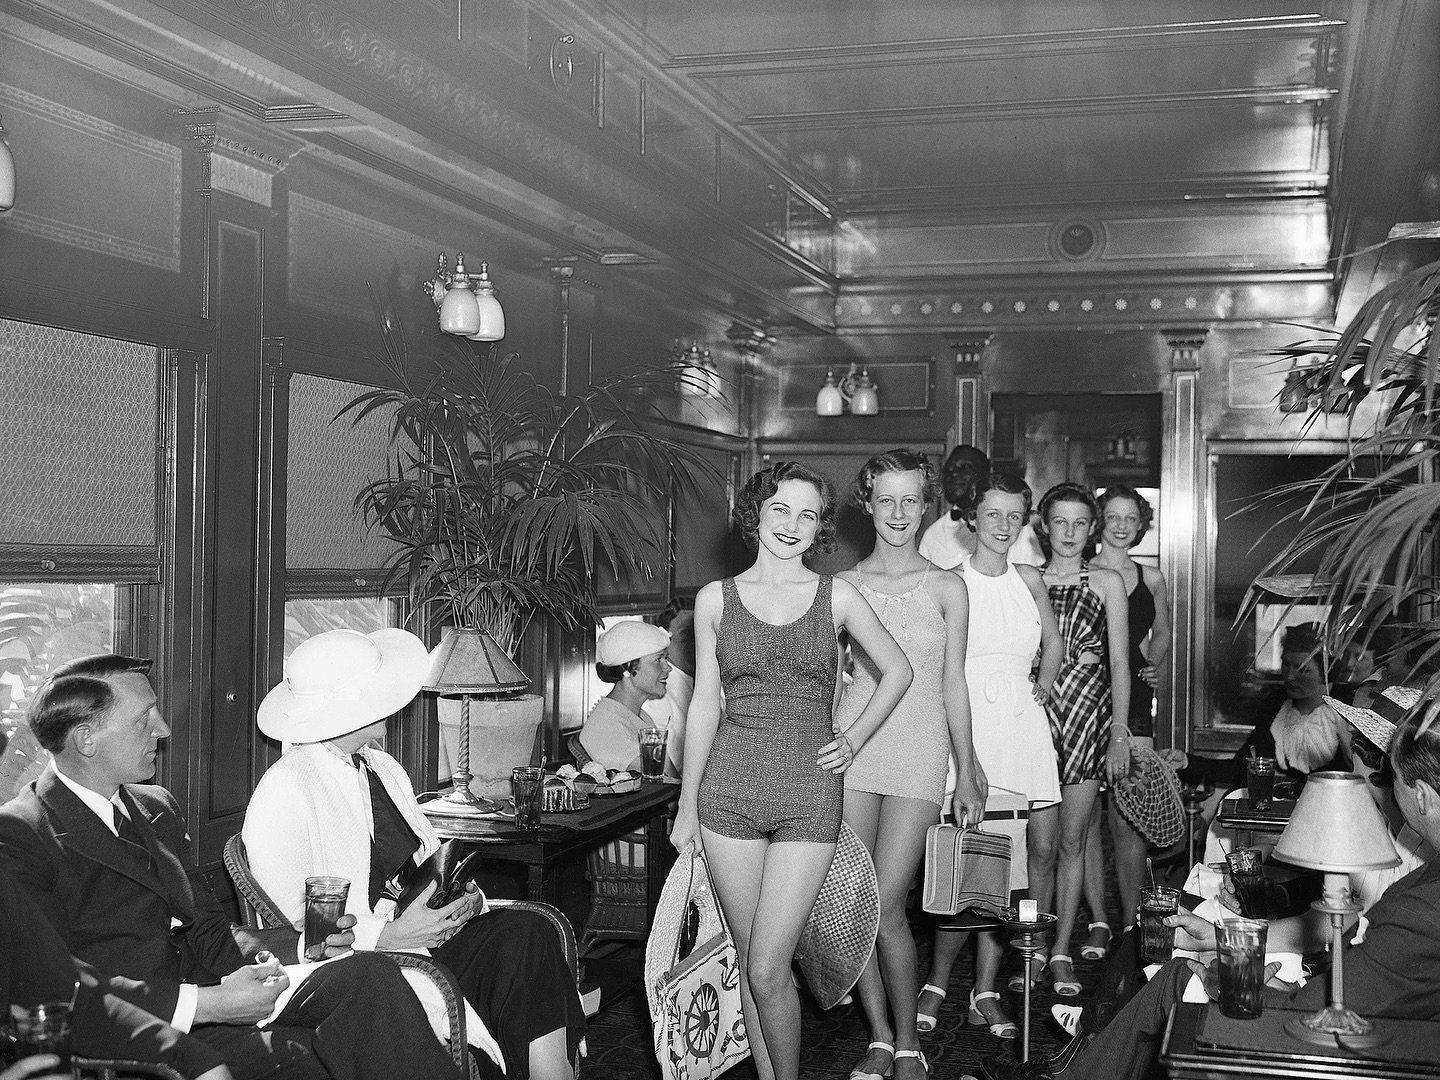 Models in Mid-Winter Fashion Show Aboard The Seaboard Airline Railway Route New York to Miami 1935 #costumeinspiration #fashioninspiration #styleinspiration #designinspiration #creativeinspiration #1930sinspiration #vintageinspiration #vintage #vinta